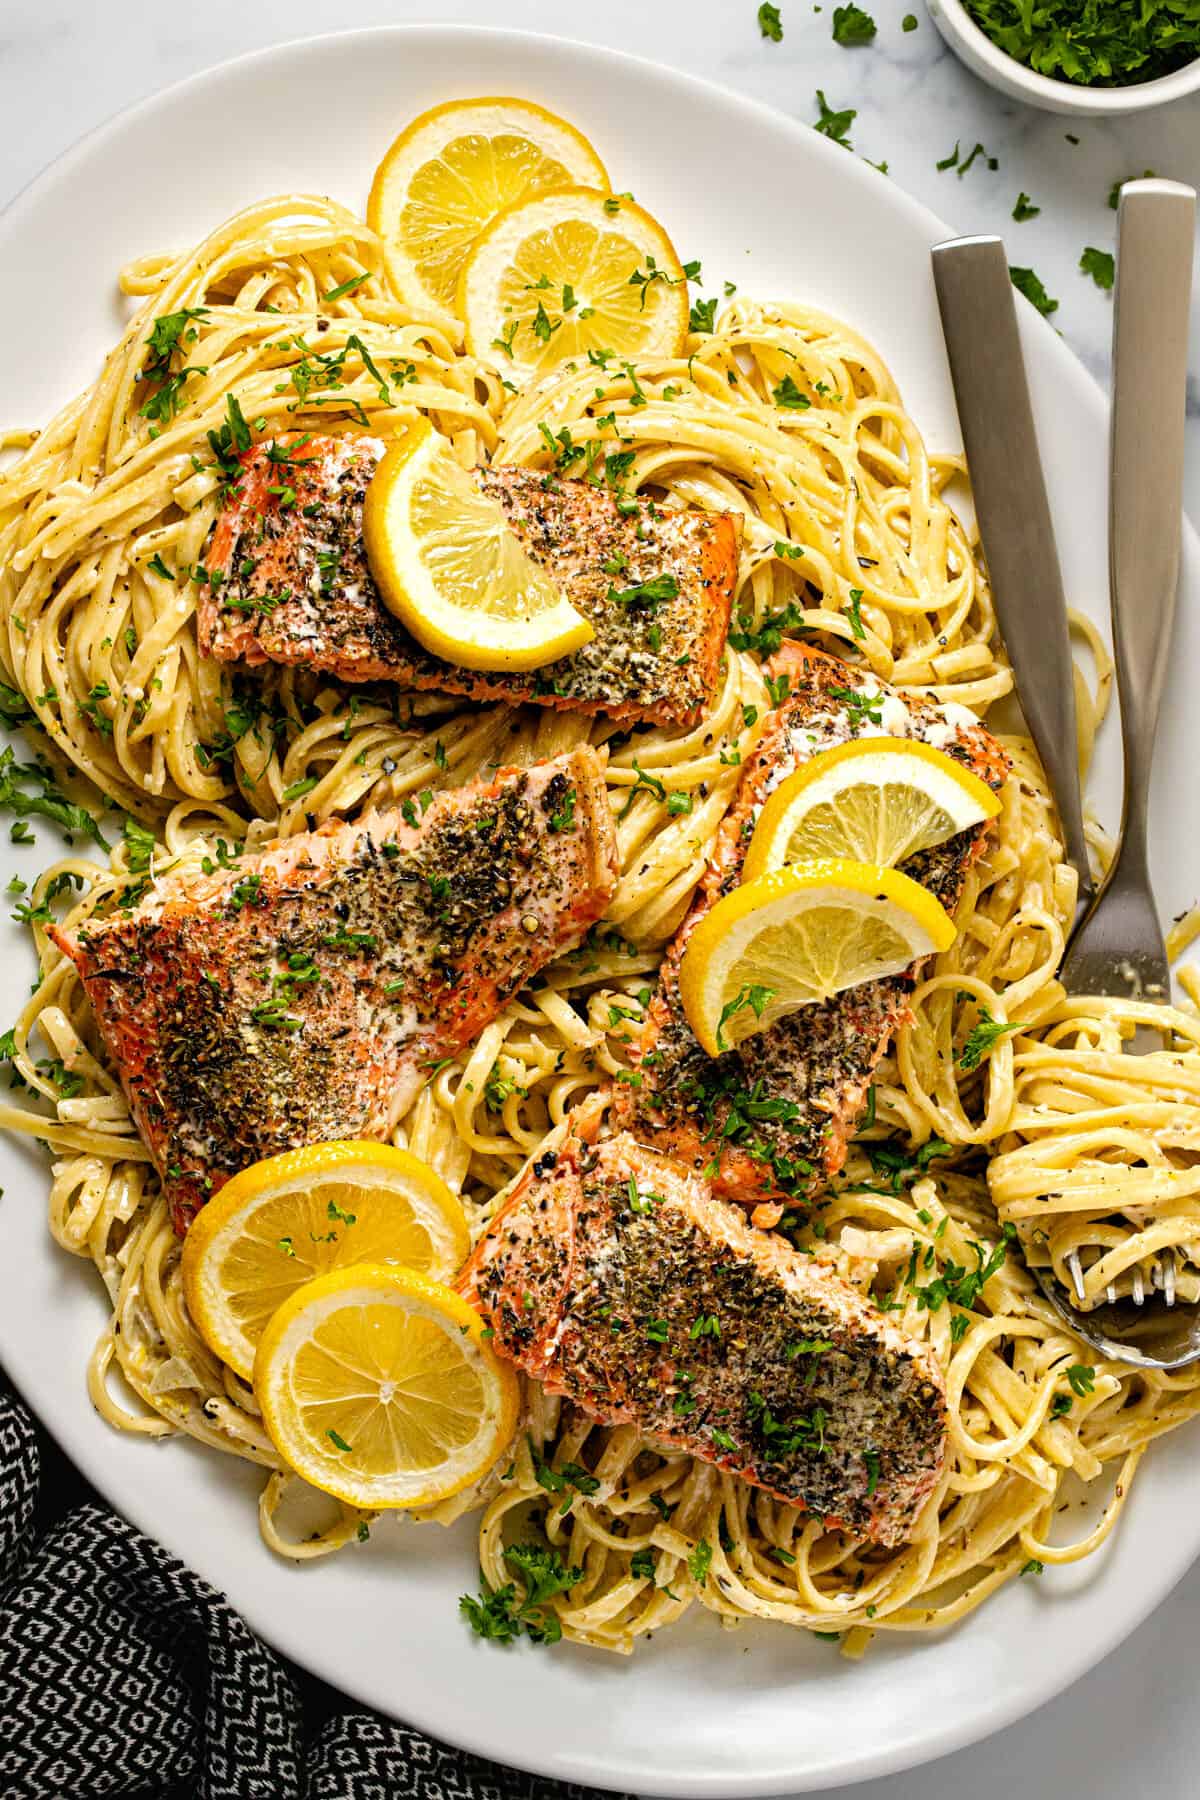 Large white serving platter filled with creamy salmon pasta garnished with parsley and lemon slices.